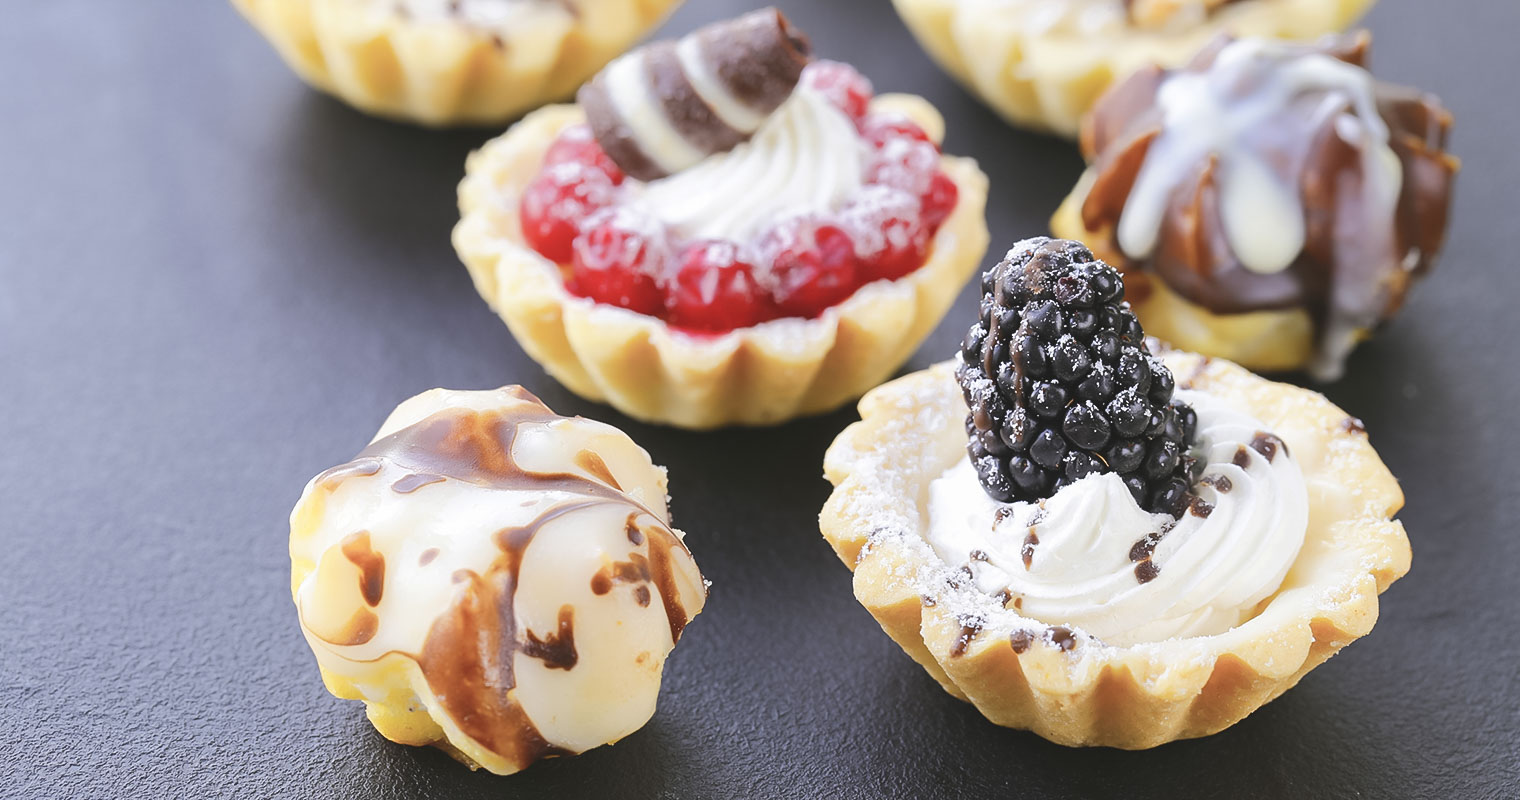 Pastries as example of food with high-glycemic index